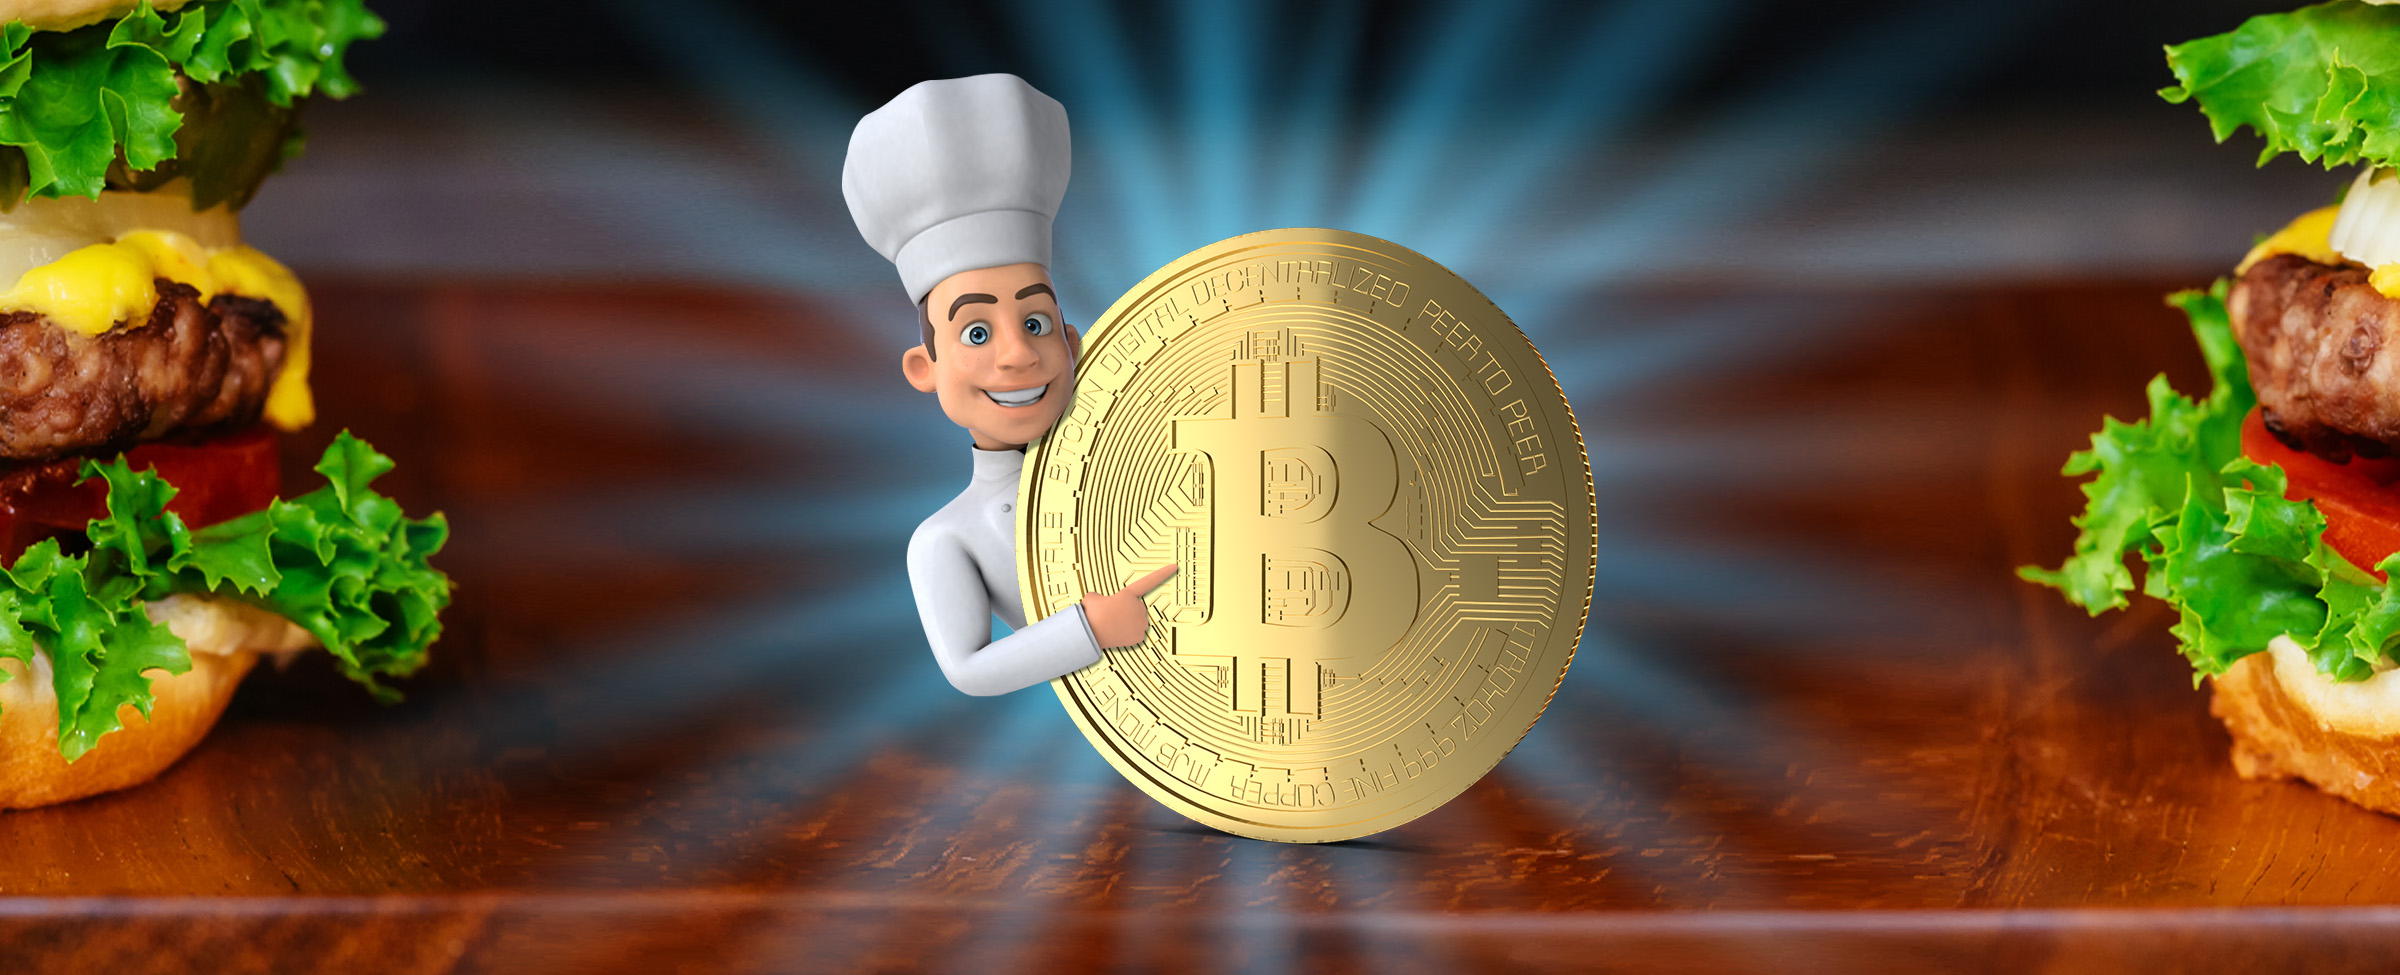 A miniature 3D-animated chef is seen peeking from behind an oversized bitcoin, pointing at the ‘B’, positioned on top of a dark wooden bench, flanked either side by two beef burgers.